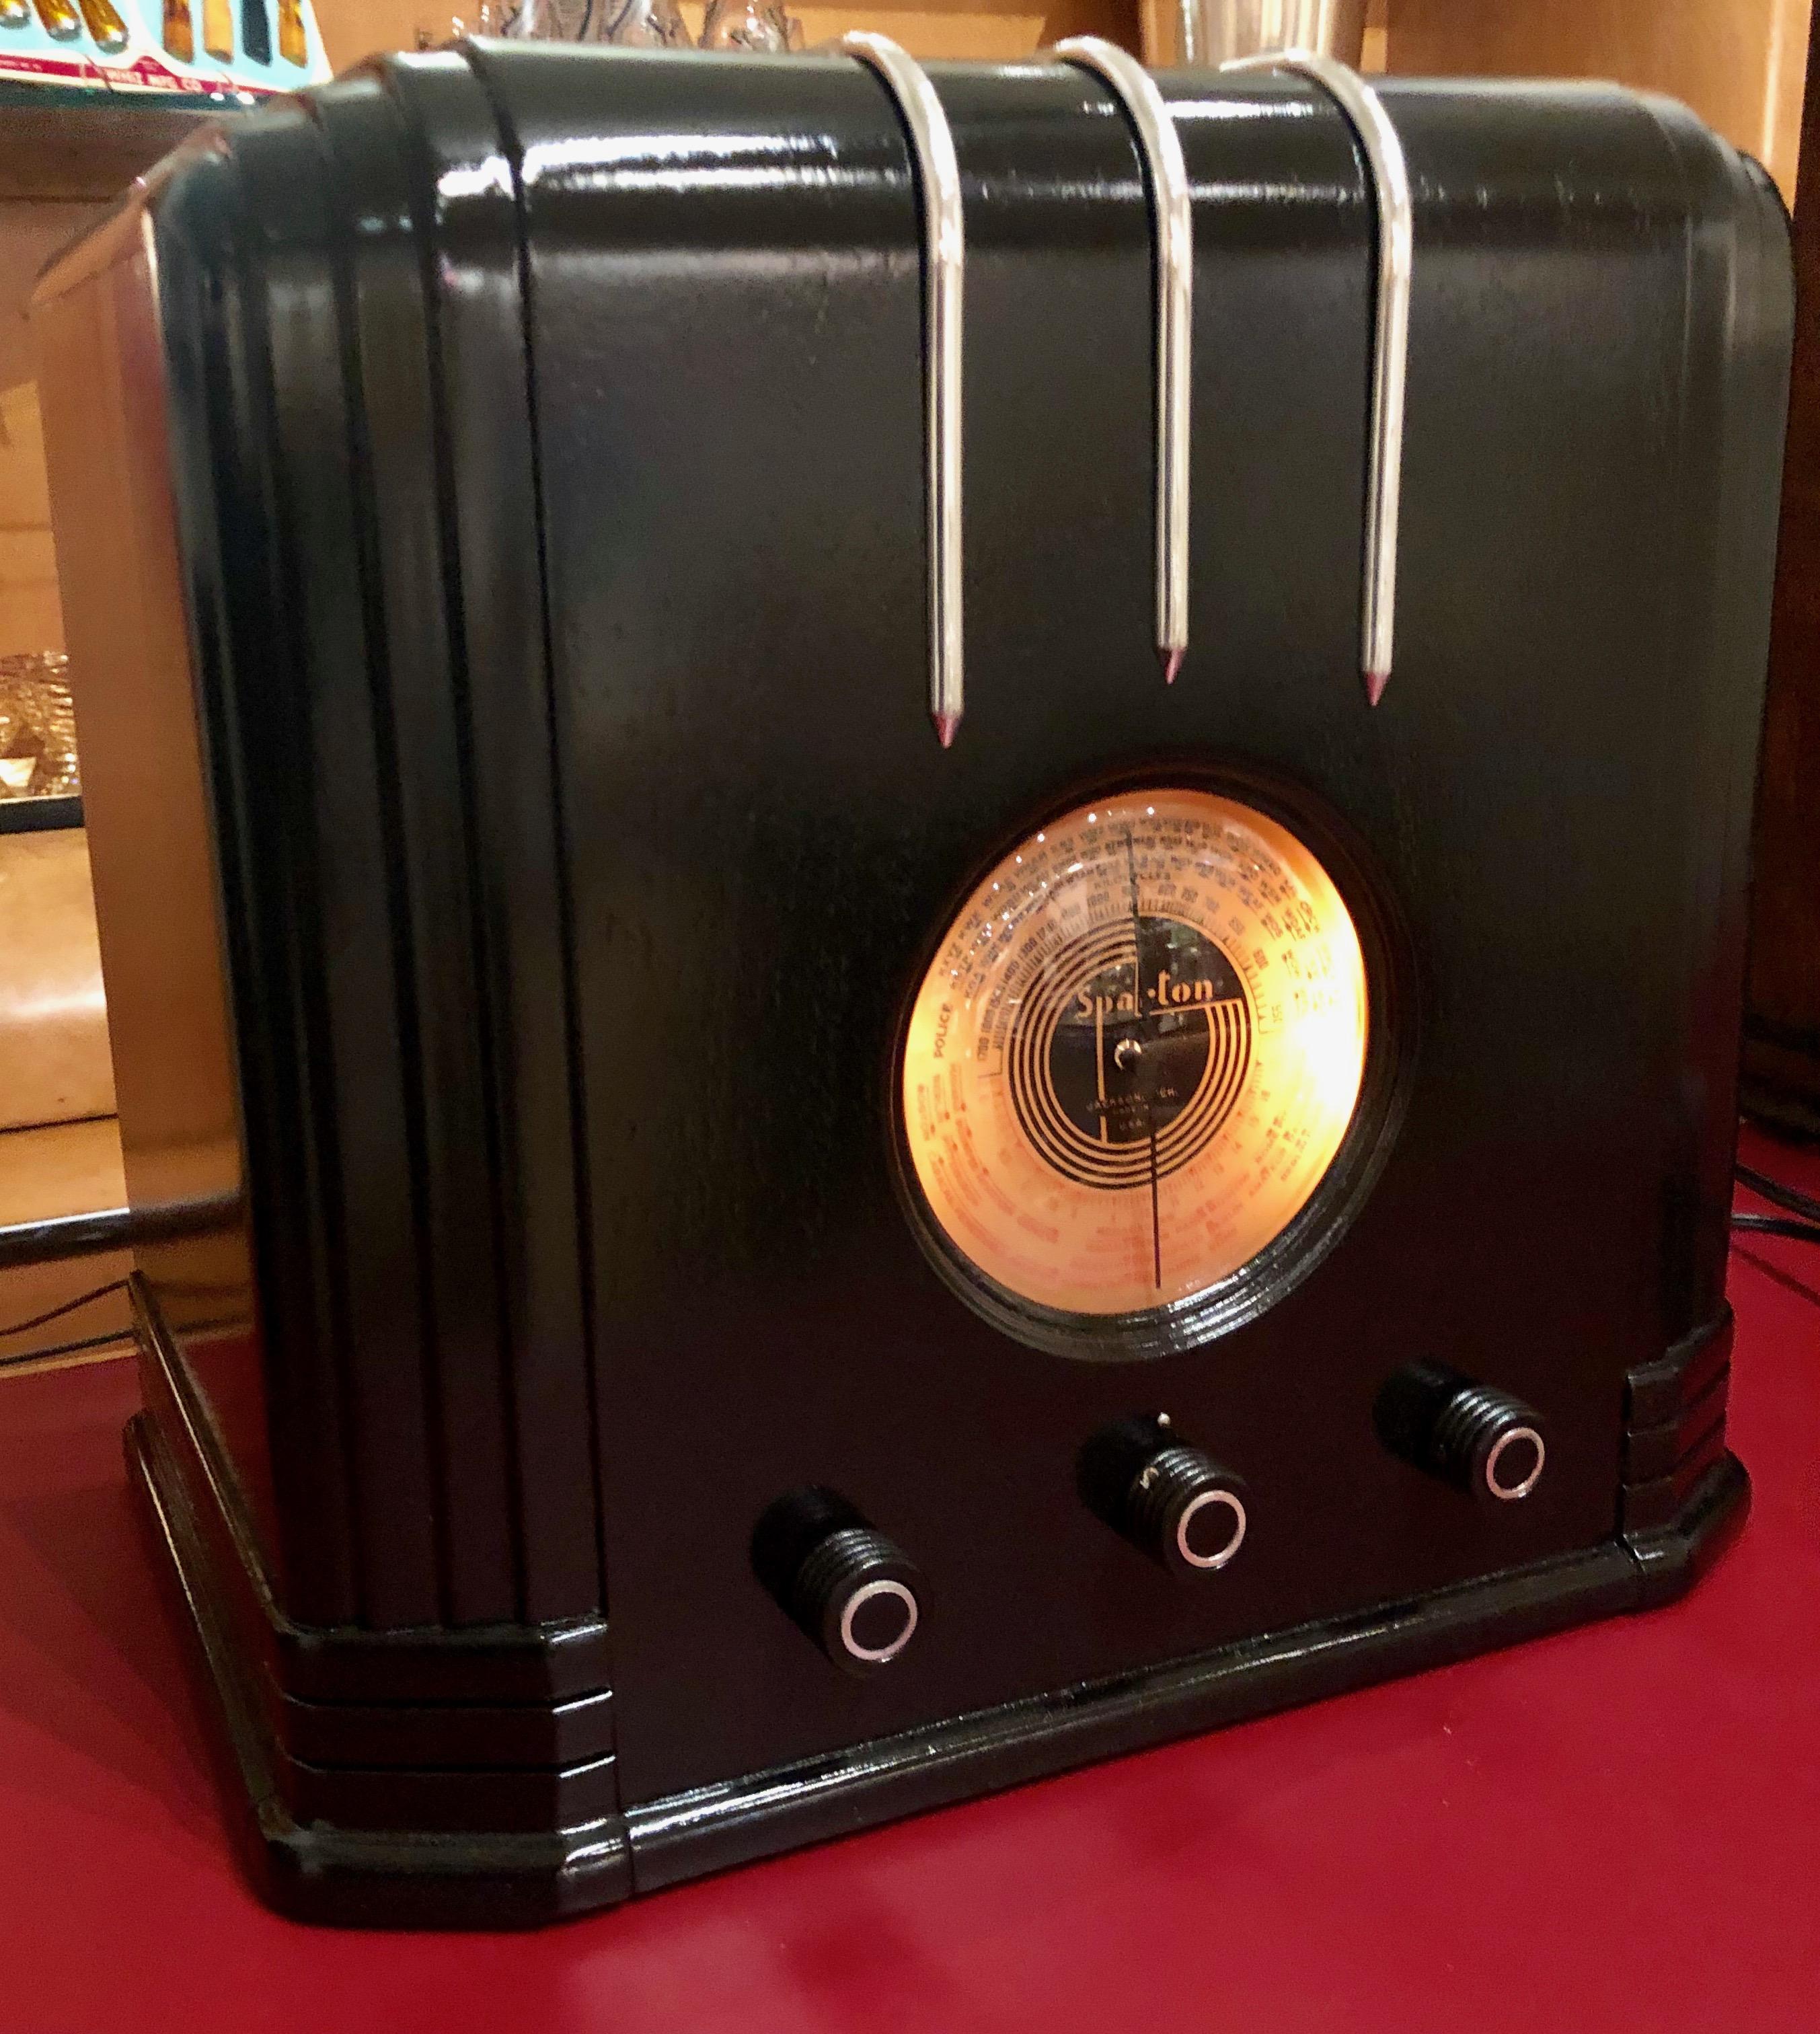 Rare 1936 517-B Sparton “Cube” with the ebony lacquer finish plus chrome trim, a rare Art Deco radio. Manufactured by the Sparks-Withington Company of Jackson, Michigan and was the creation of renowned Industrial designer Walter Dorwin Teague. This